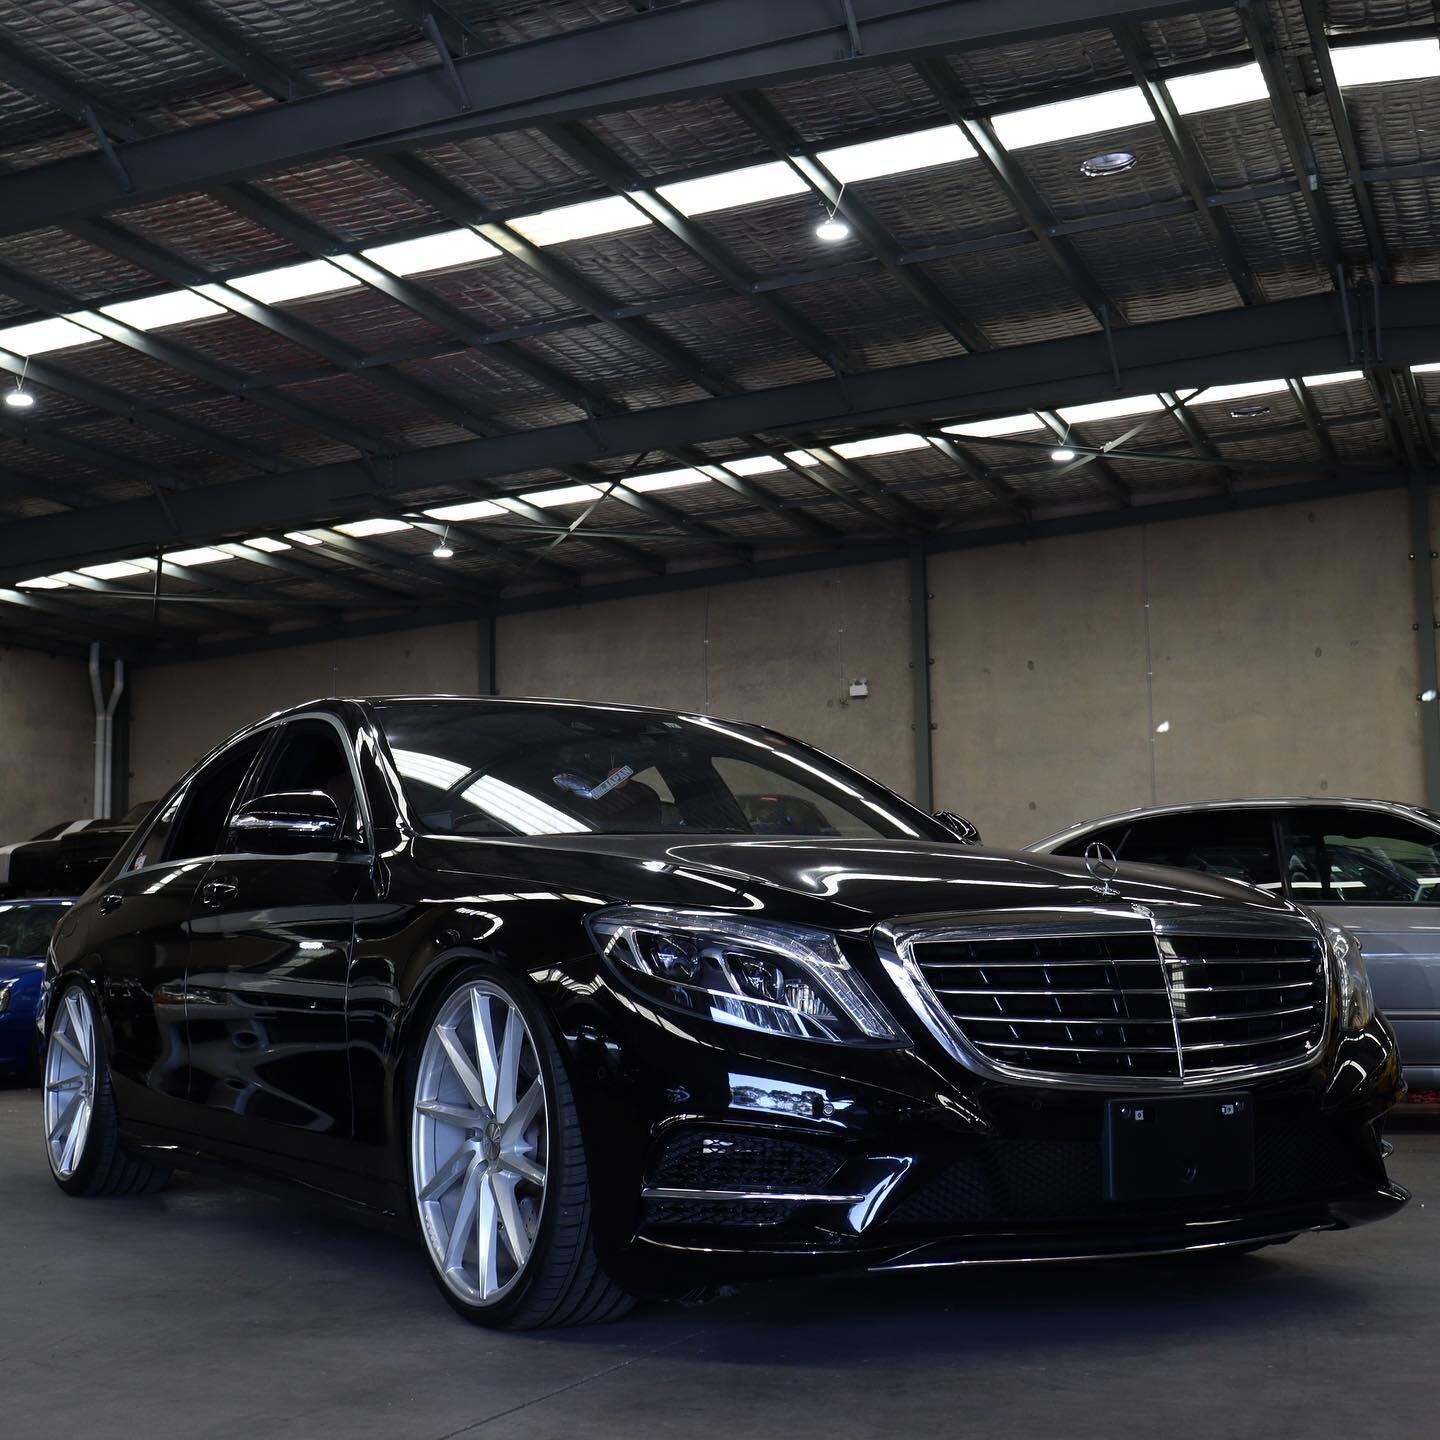 2015 Mercedes Benz S-Class S400H AMG Sports Package

📌 107,XXX KM
📌 3.5L V6 NA HYBRID 
📌 7 SPEED AUTOMATIC TRANSMISSION
📌 BLACK
📌 SUNROOF

🚗 $59,990

GET $1,000 CASH BACK AND 2 FREE SCHEDULED SERVICES WHEN YOU PURCHASE ANY OF OUR SUBARU LEGACY 